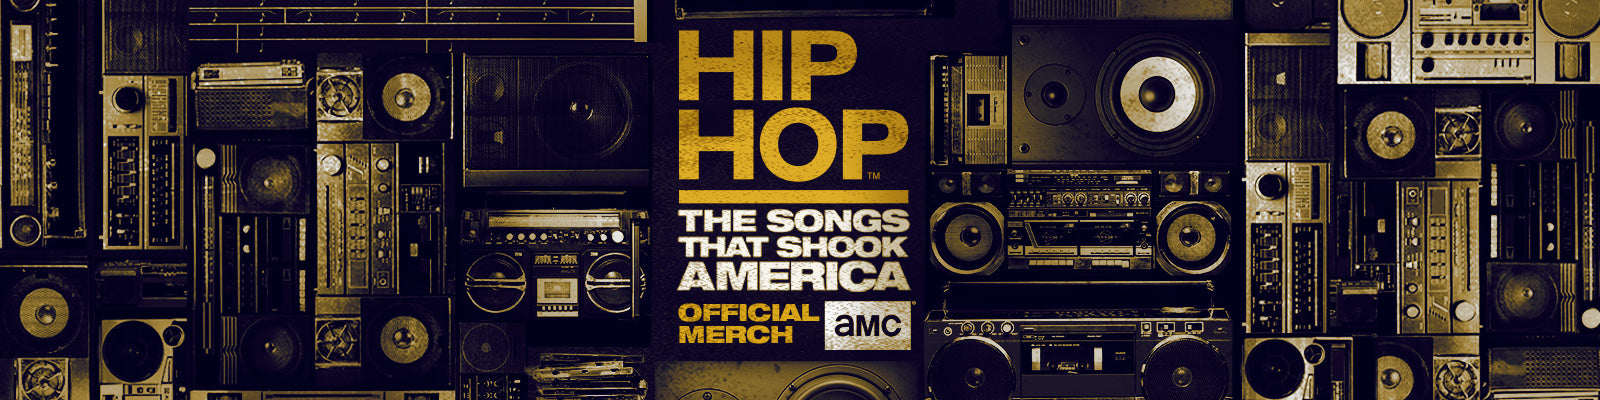 hip hop the songs that shook america banner